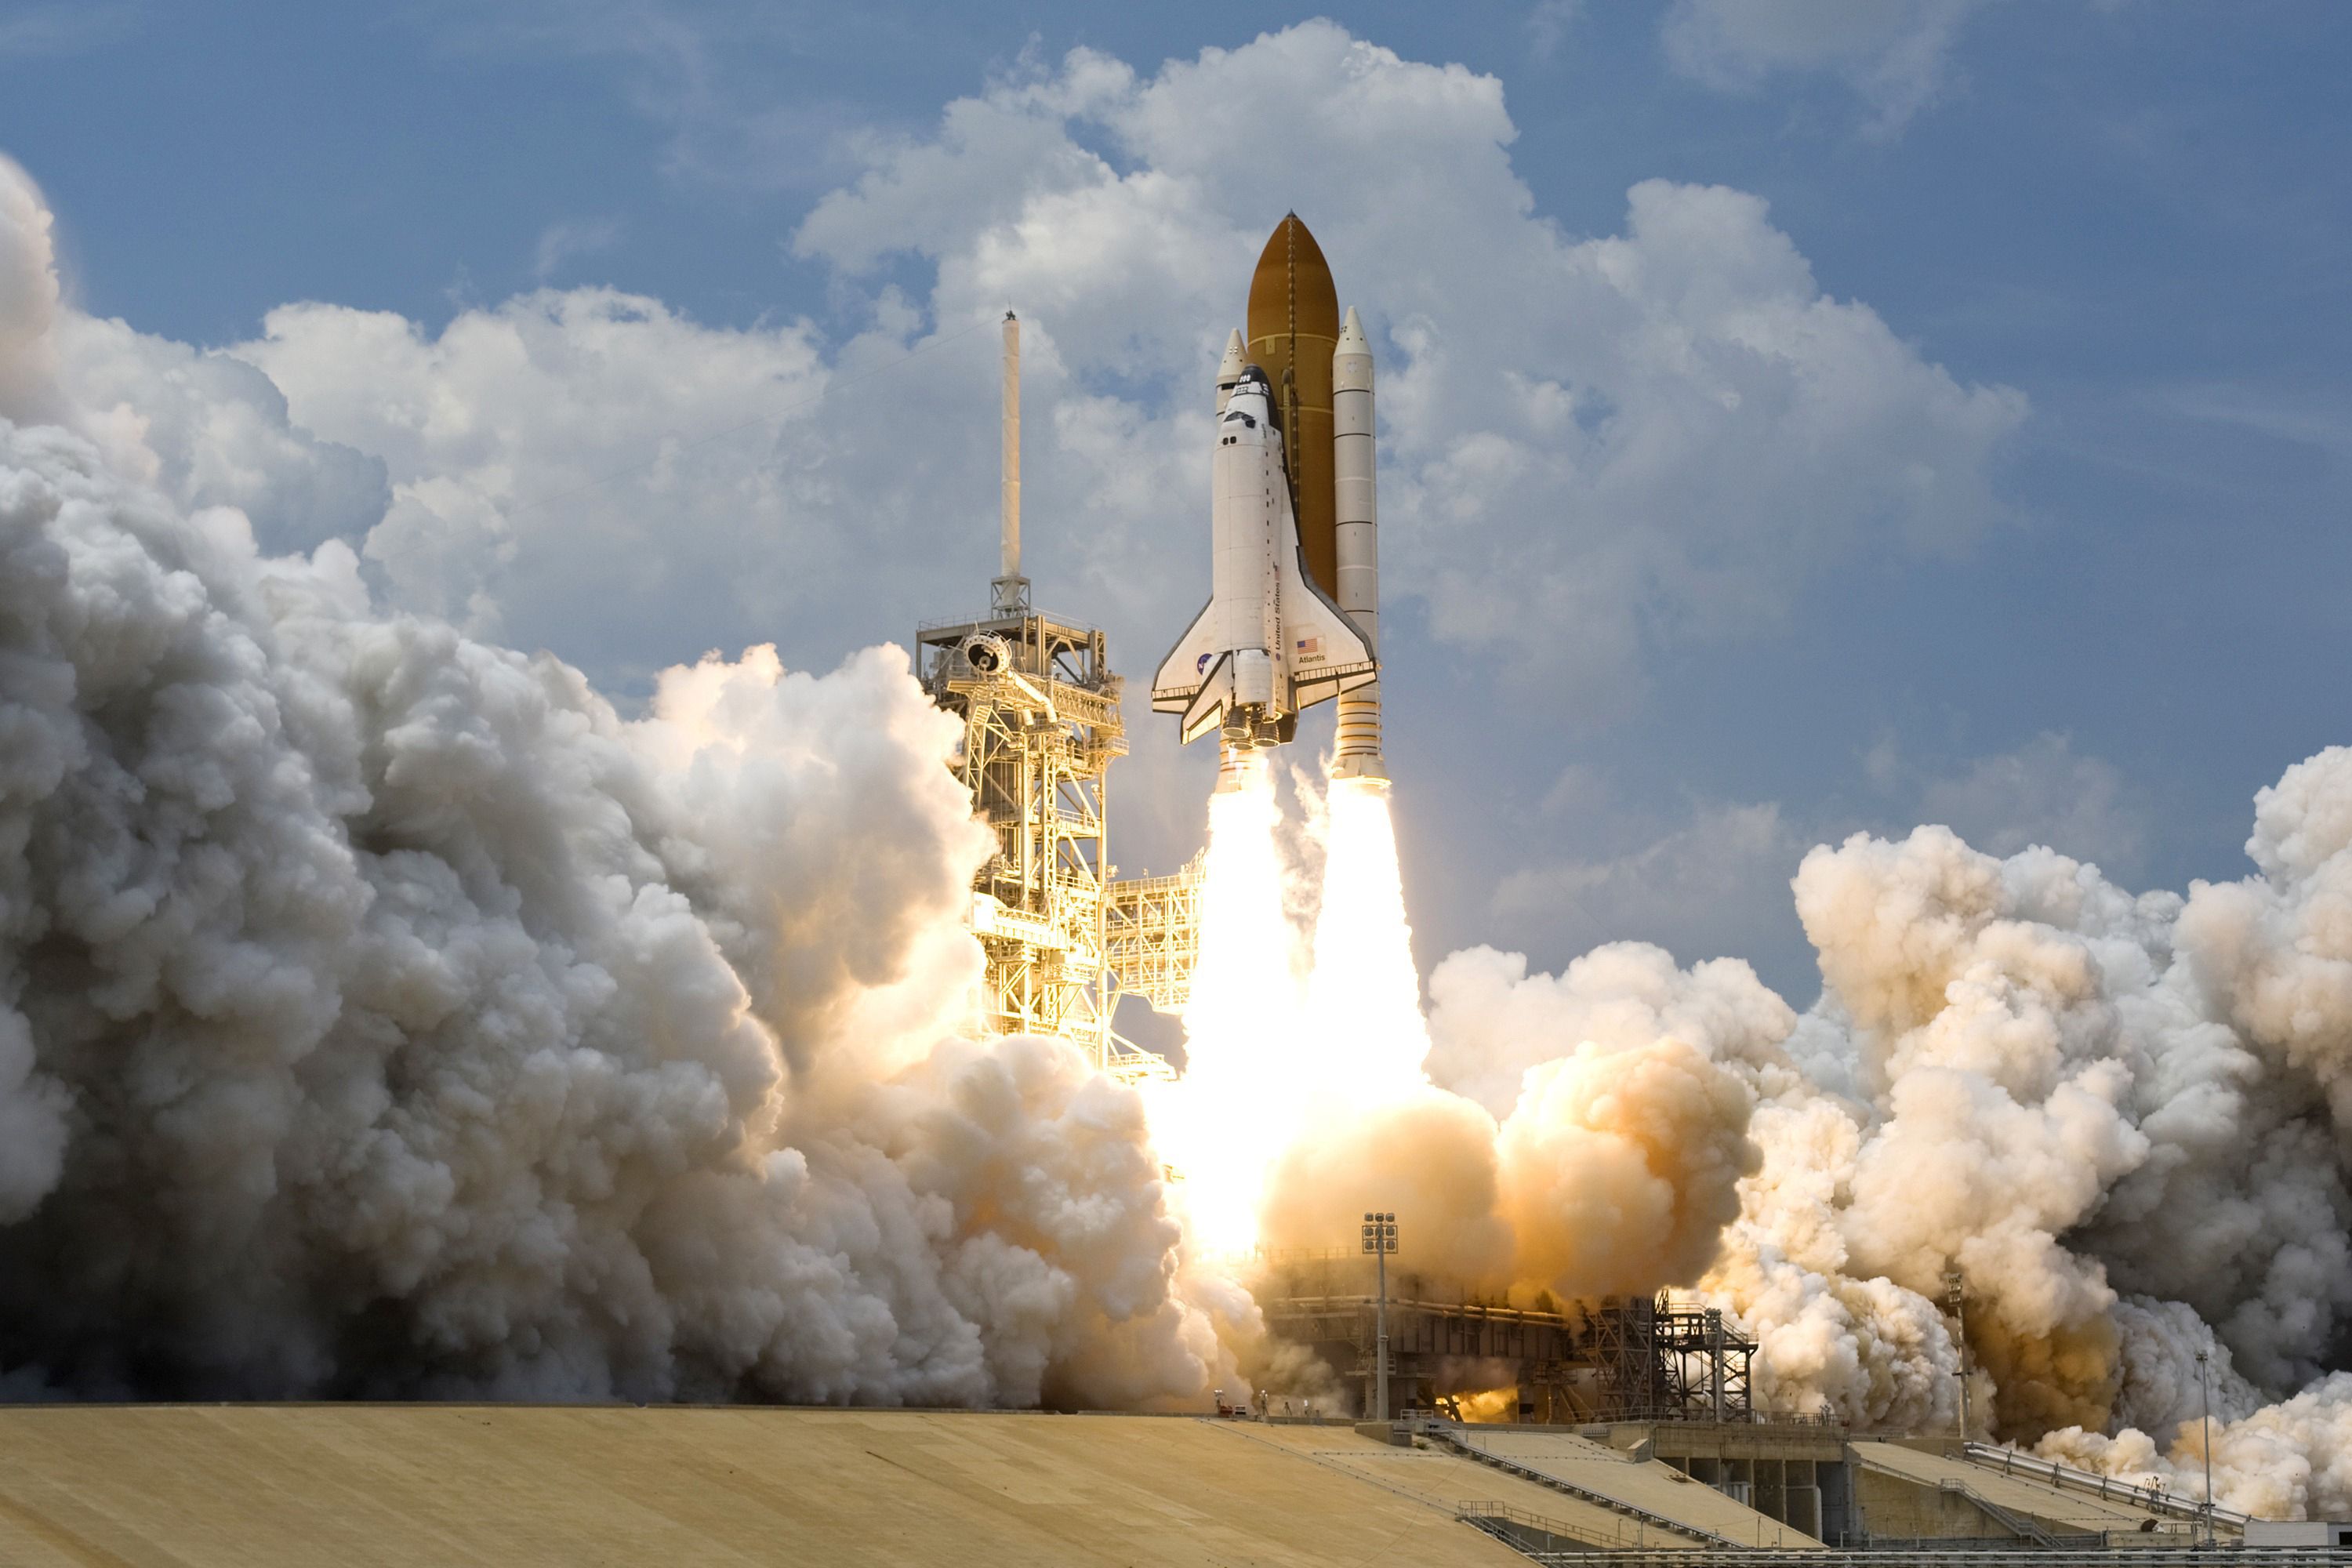 Daily Wallpaper: Space Shuttle Atlantis Takeoff. I Like To Waste My Time